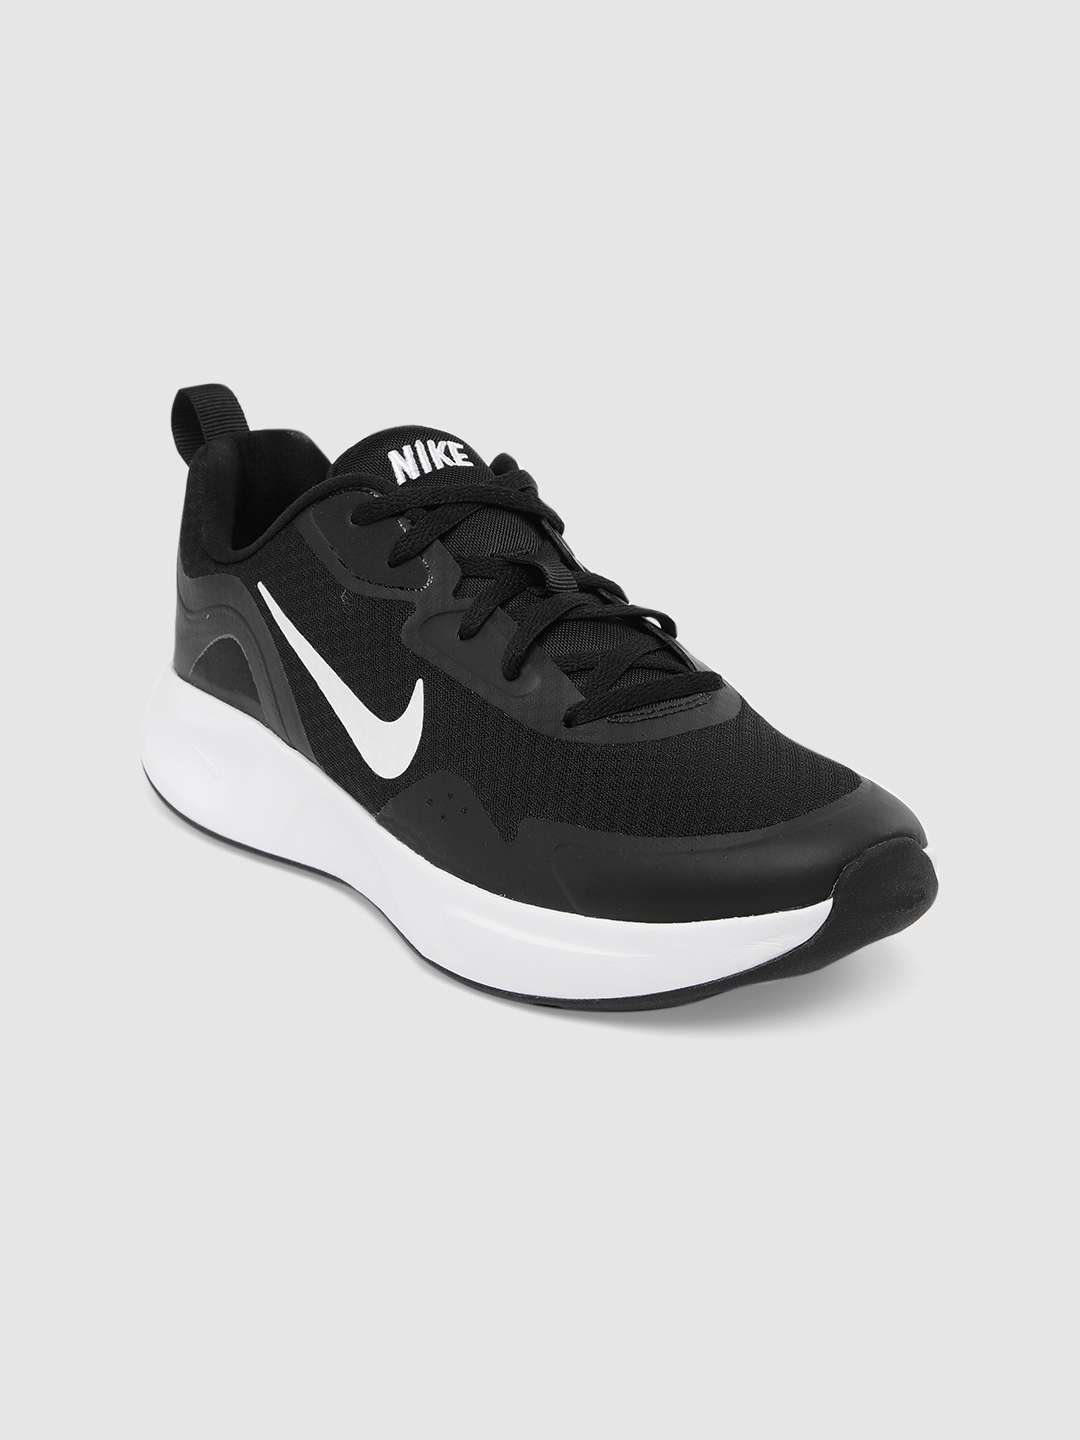 61 Sports Buy womens nike shoes online australia Combine with Best Outfit